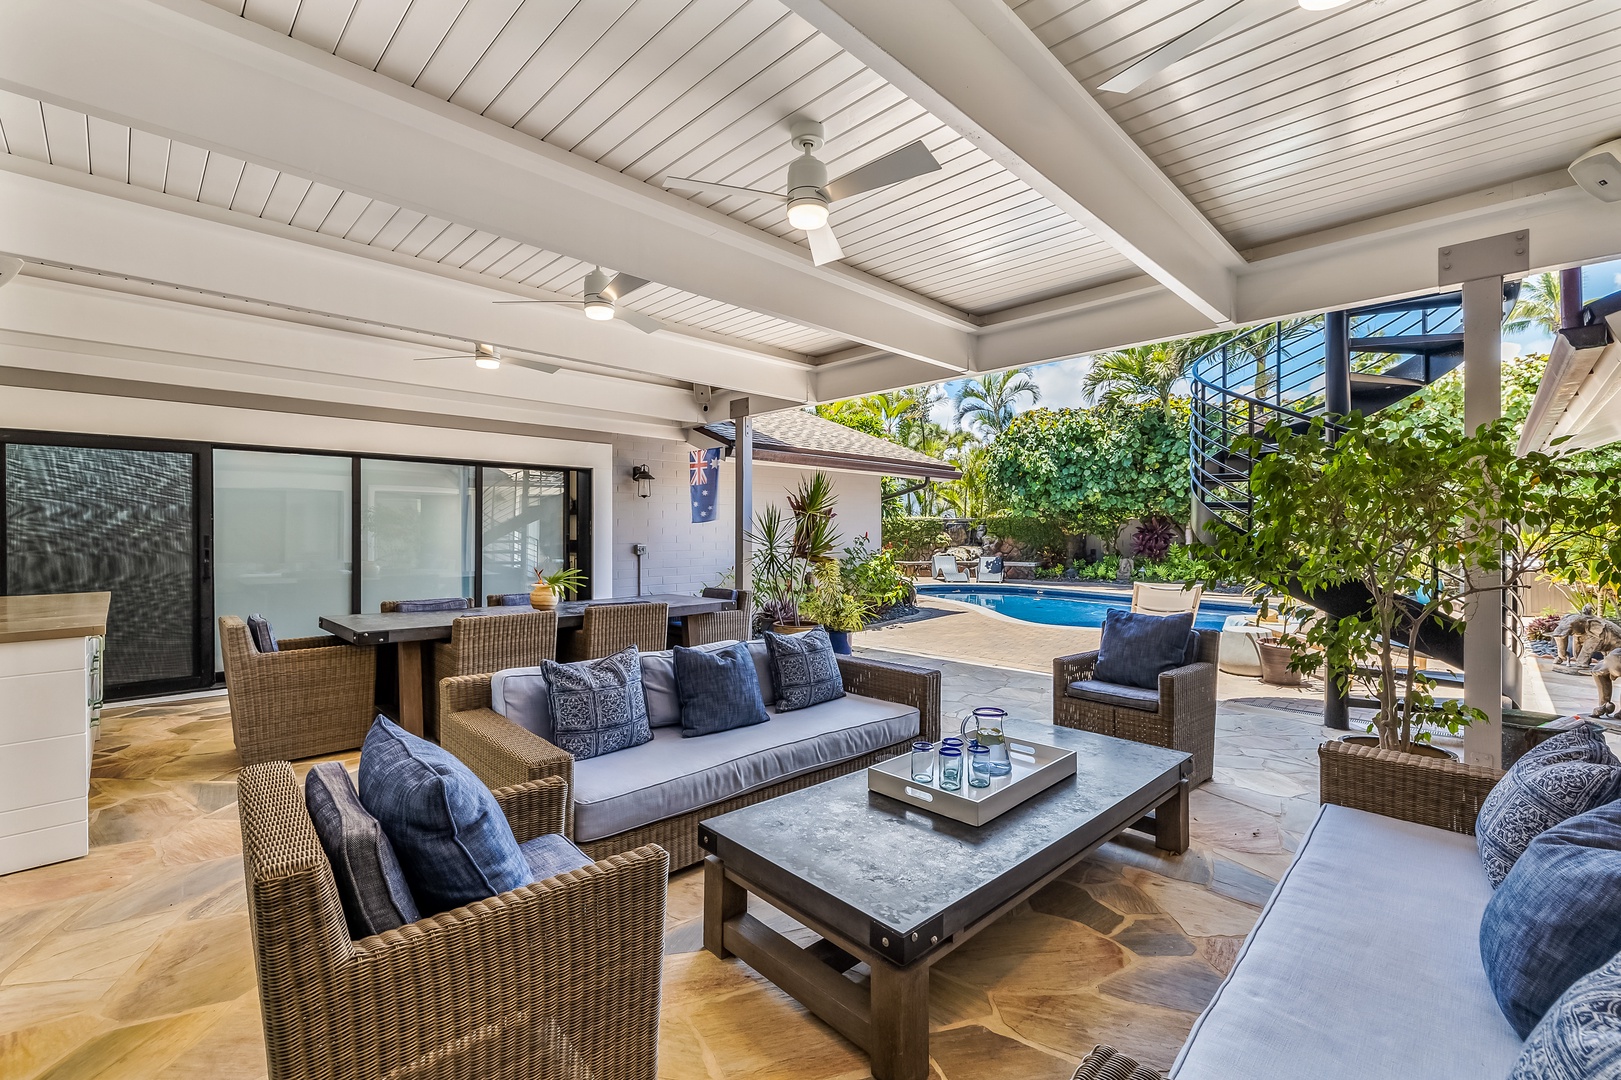 Kailua Vacation Rentals, Hale Ohana - This covered lanai with ceiling fans interconnects with the indoor living area